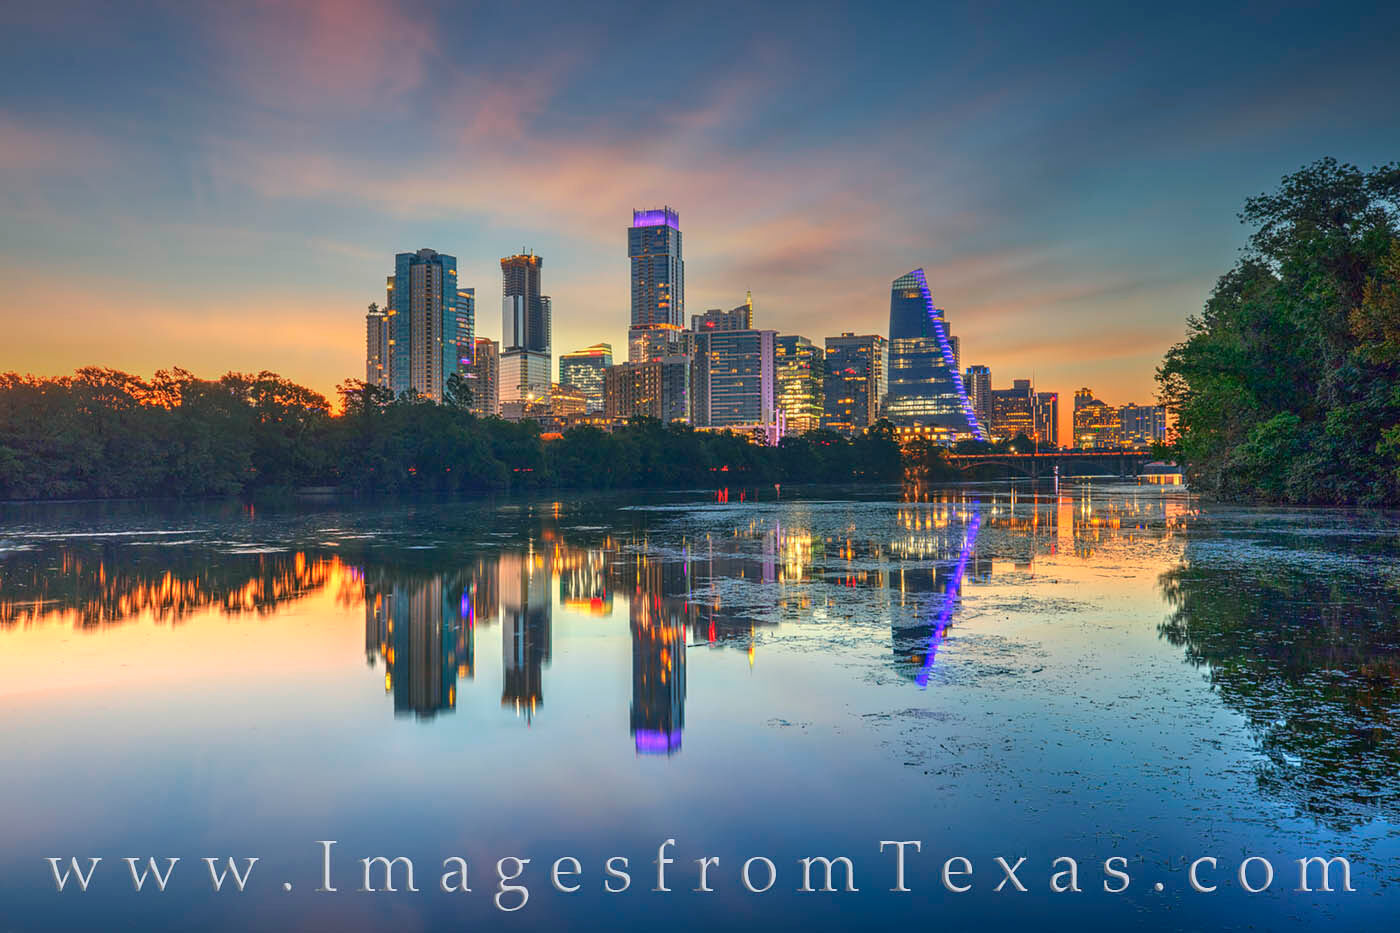 On a very calm and warm late August morning, the quiet Austin skyline shows its reflection in the still water of Lady Bird Lake...